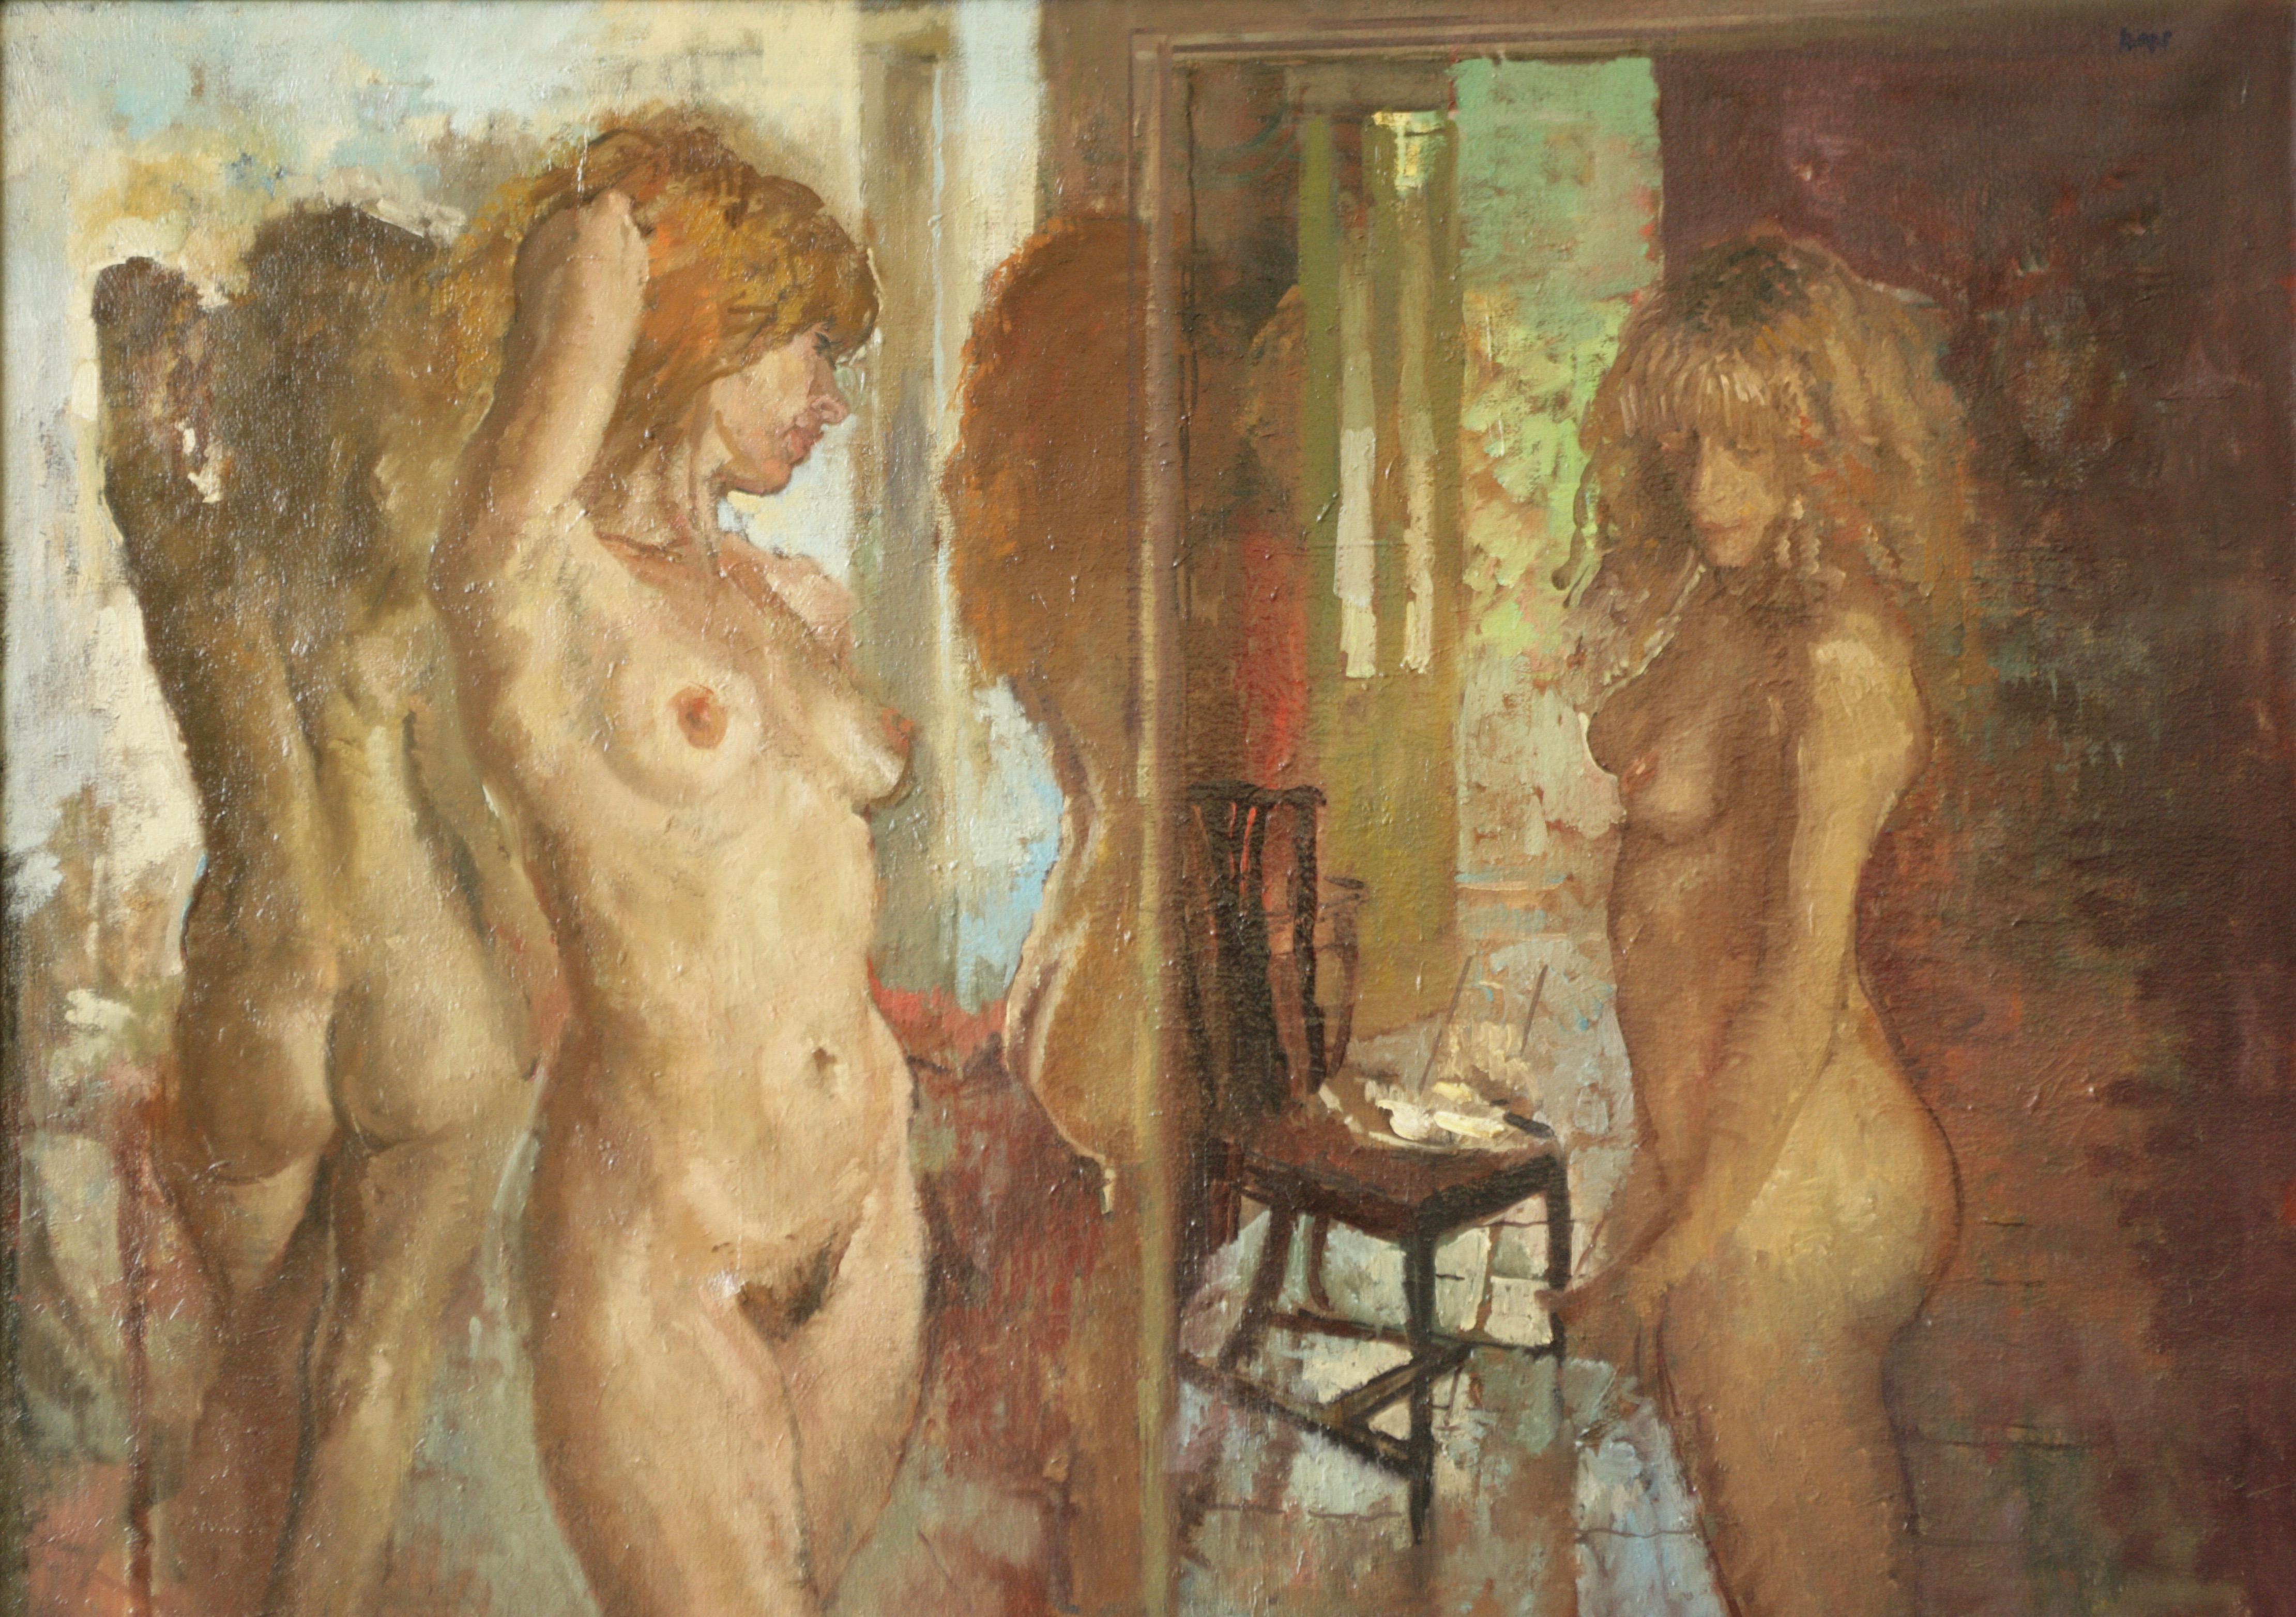 MODELS in front of the MIRROR PETER KUHFELD CONTEMPORARY BRITISH ARTIST - Painting by Peter Kuhfeld